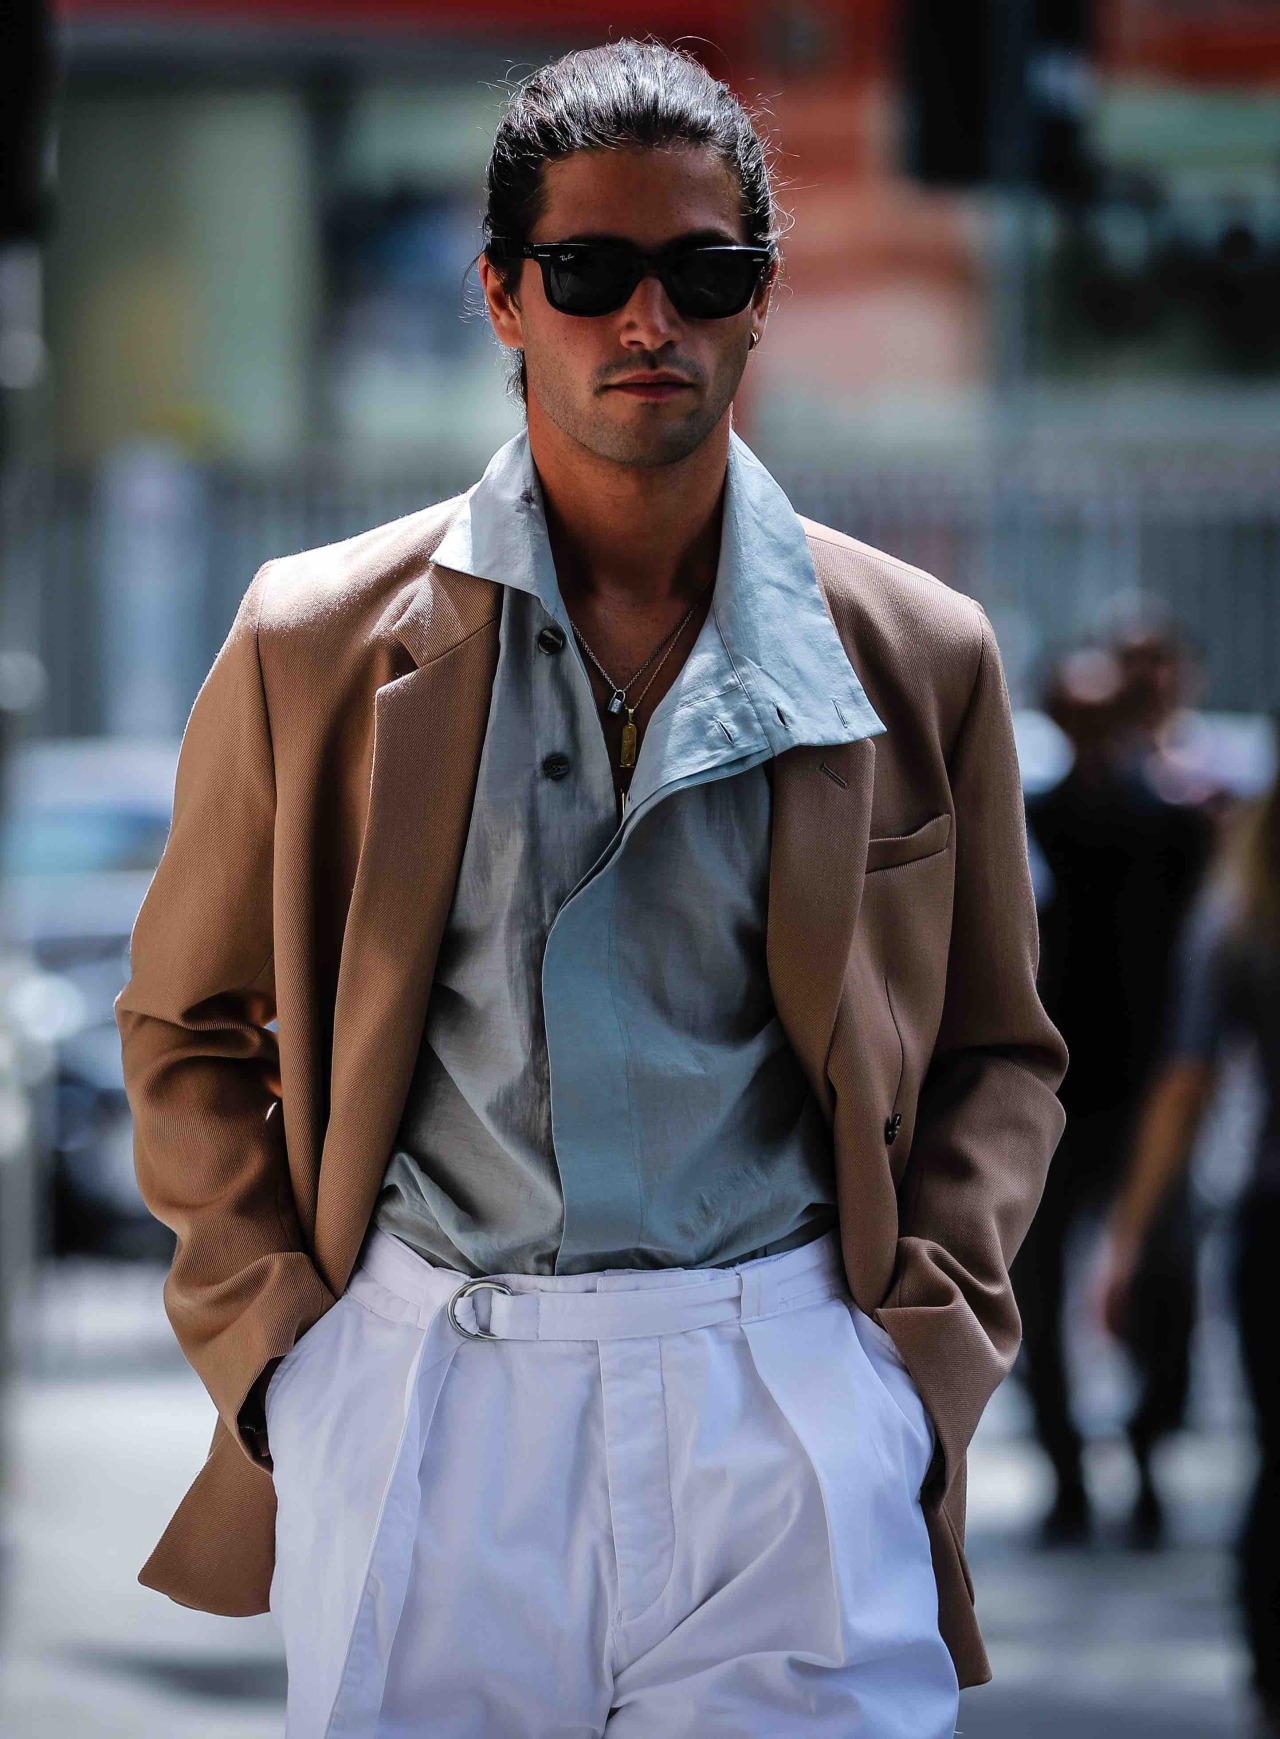 In Fashion | Spring Style for Men: Style Inspiration & a Shopping List